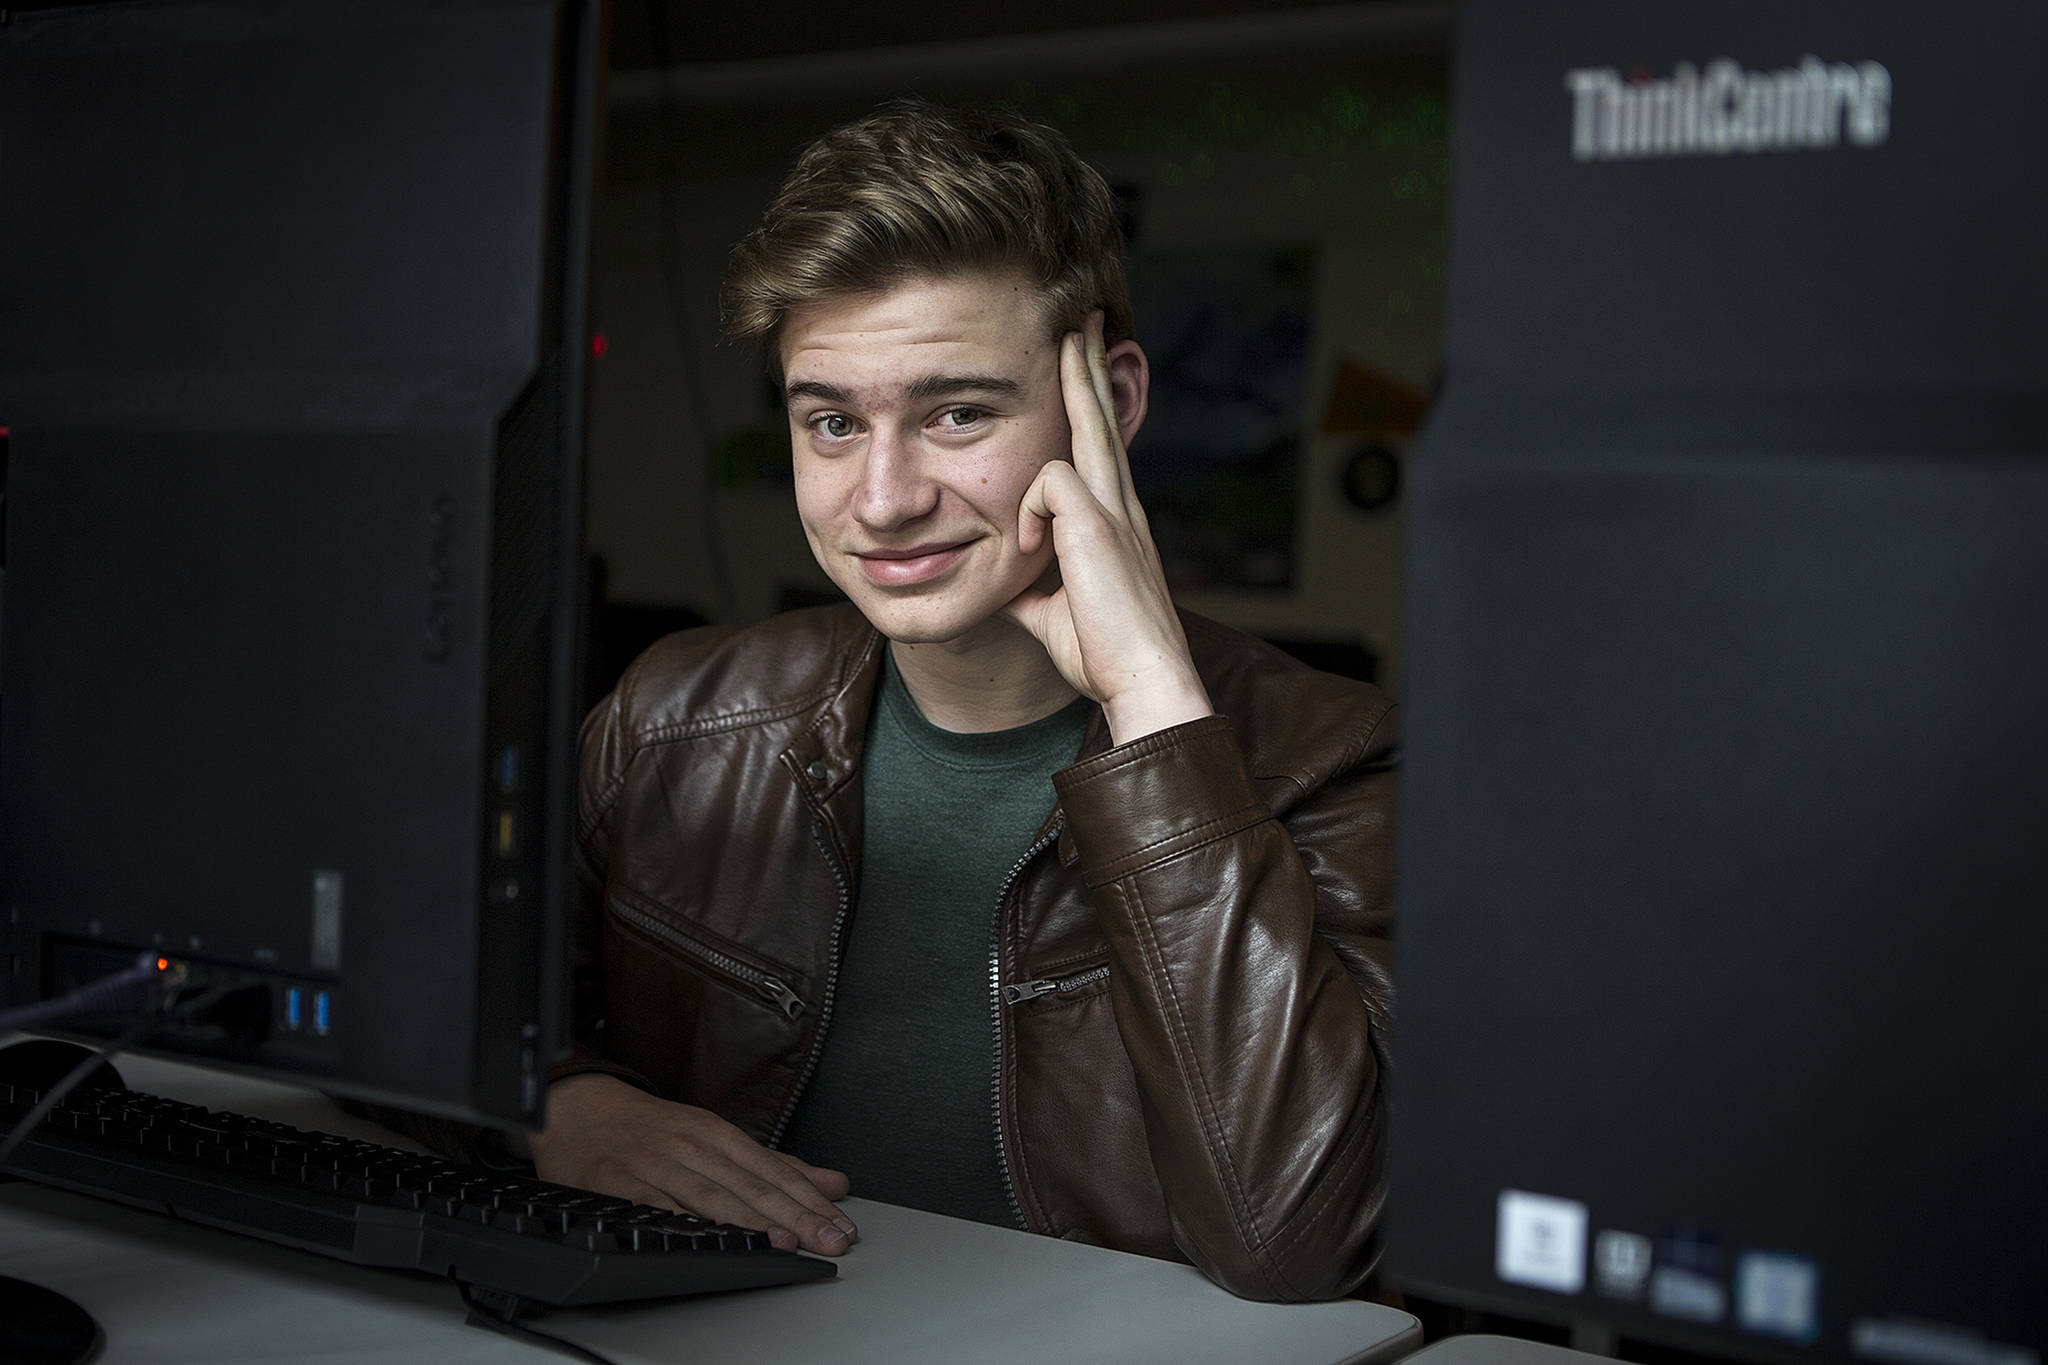 Cavelero Mid-High student Bailey Griffin has become a Certified Microsoft Manager through his many certifications of Microsoft software programs. (Ian Terry / The Herald)